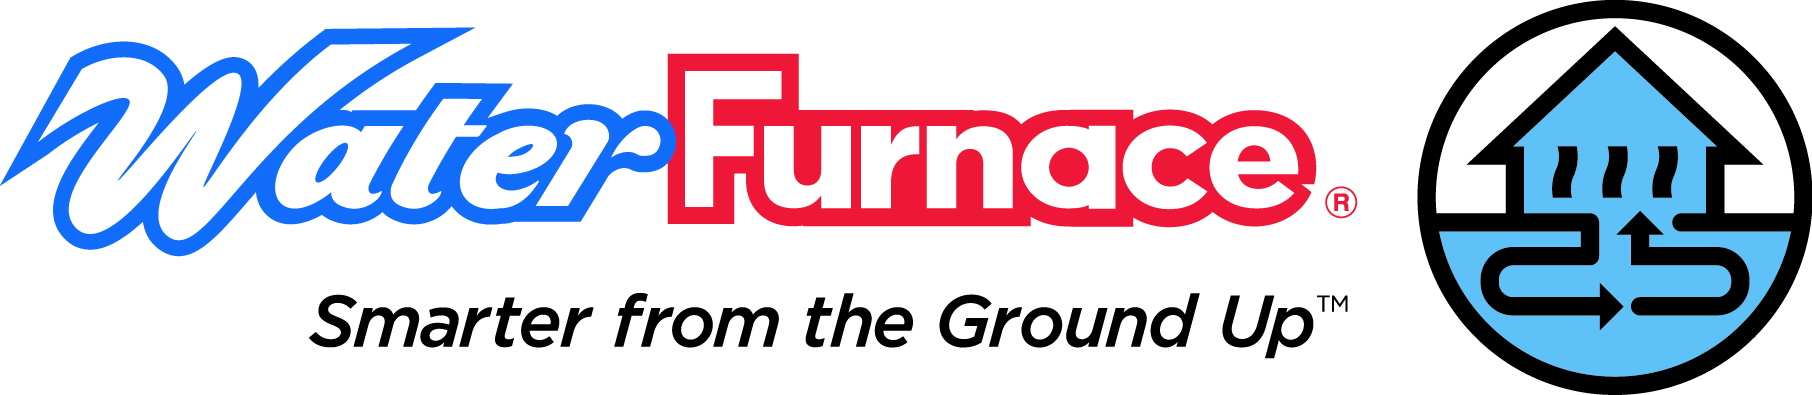 Water Furnace: Smarter From The Ground Up Logo